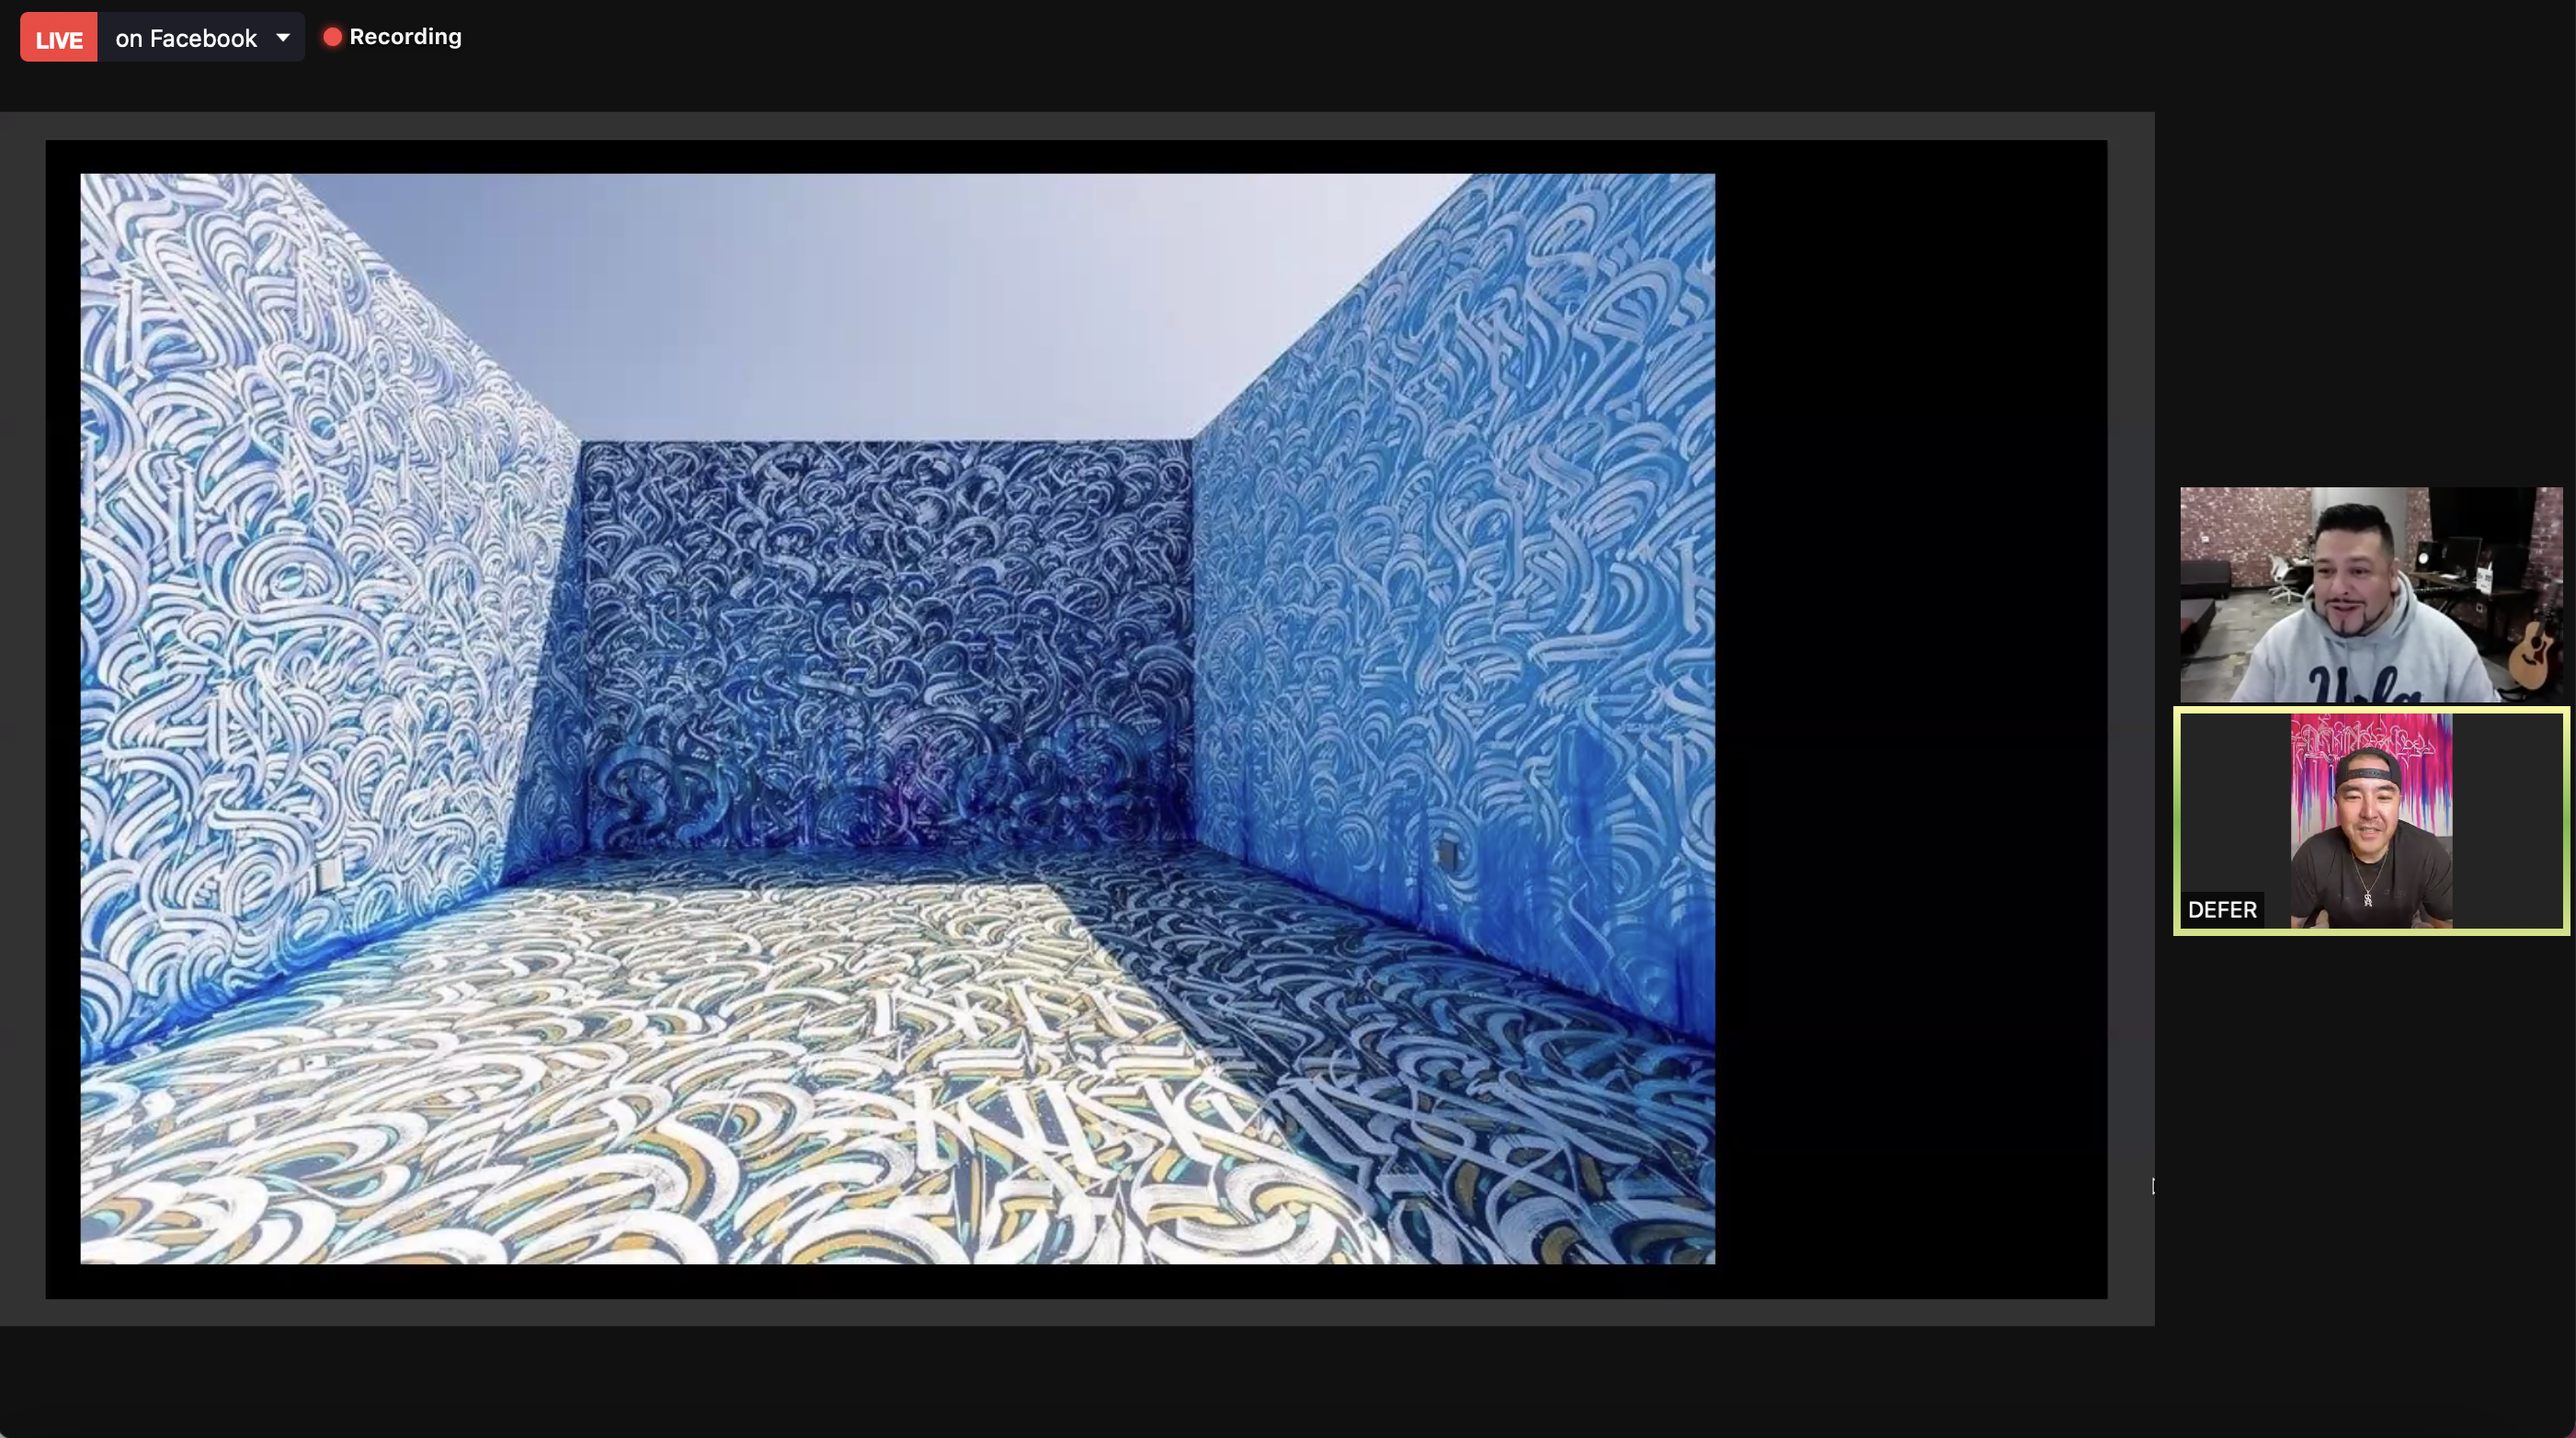 A screenshot of a zoom call shows two individuals, including artist DEFER. In the center of the screen is one of DEFER's works, a room filled with blue graffiti.